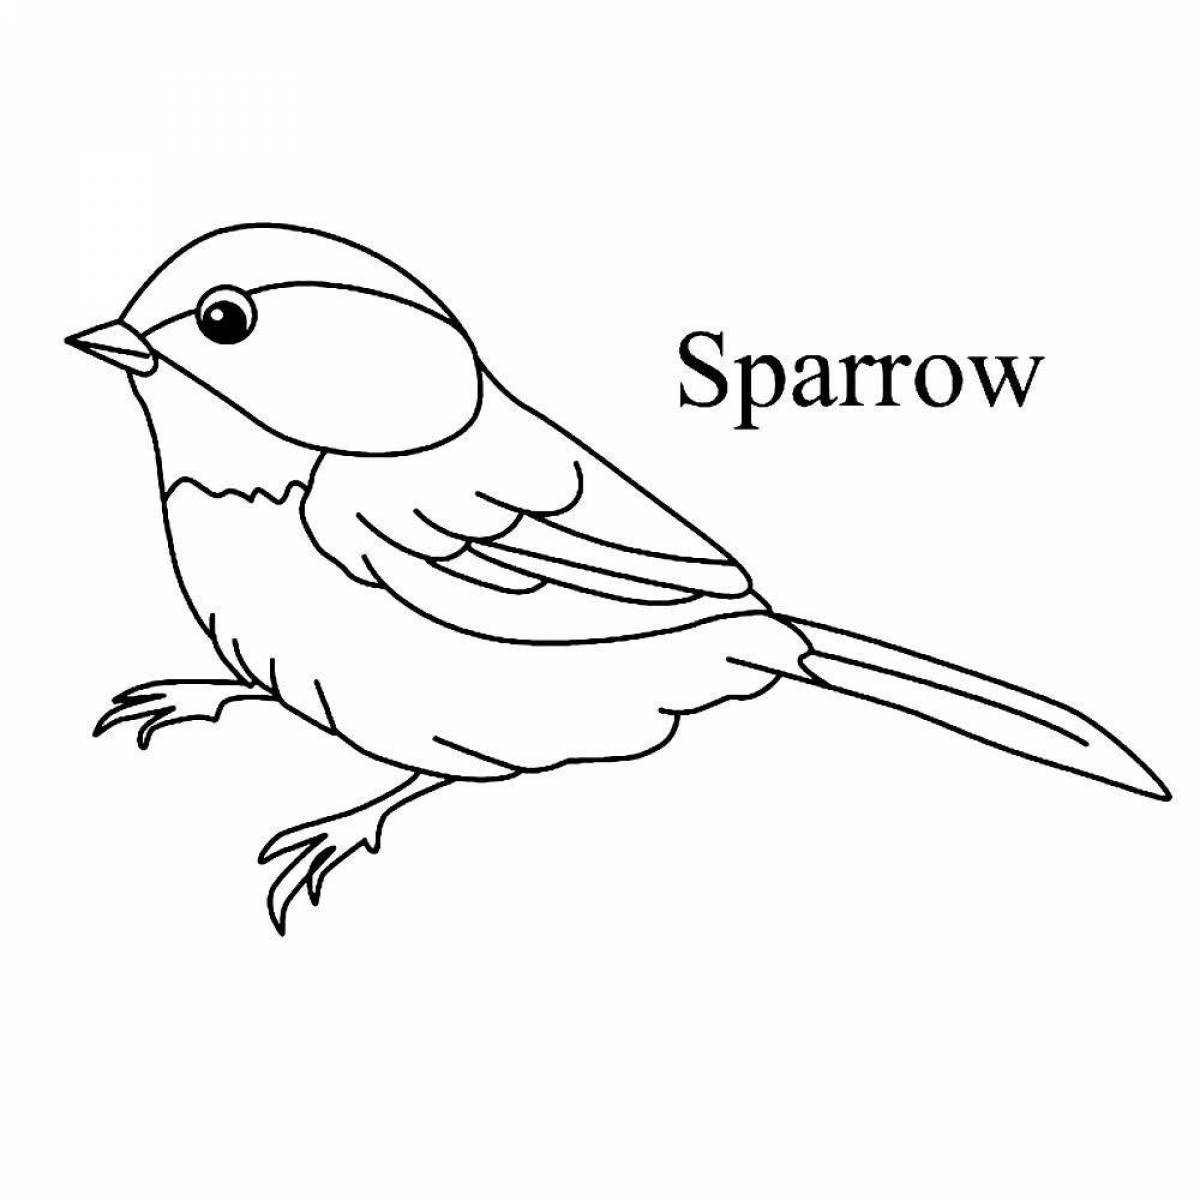 A fun sparrow coloring book for kids